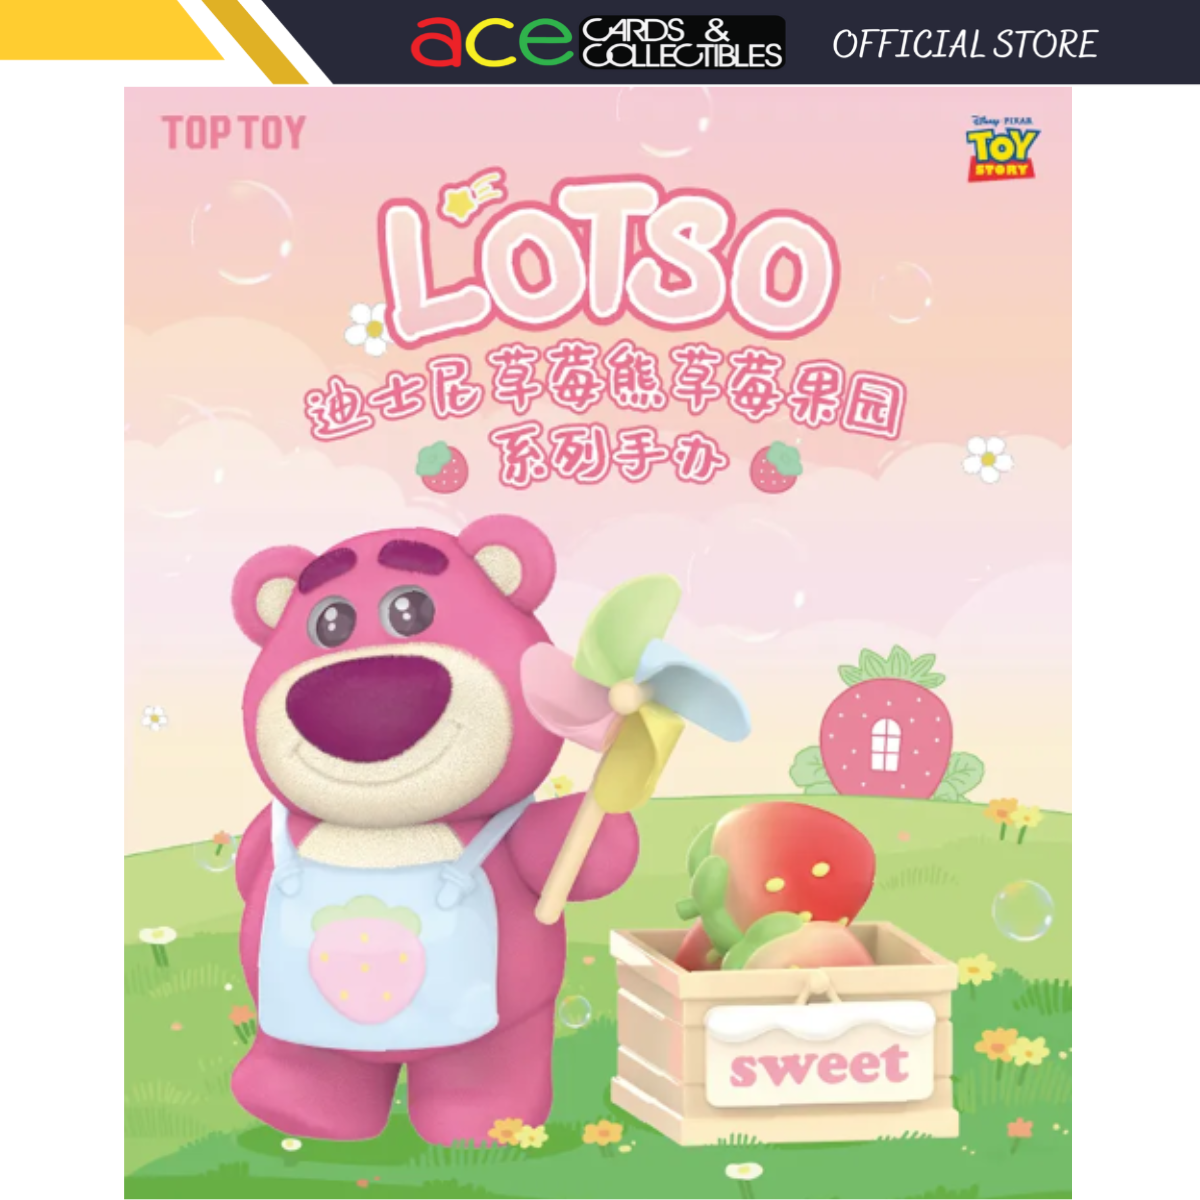 Top Toy x Lotso Strawberry Orchard Series-Single Box (Random)-TopToy-Ace Cards & Collectibles